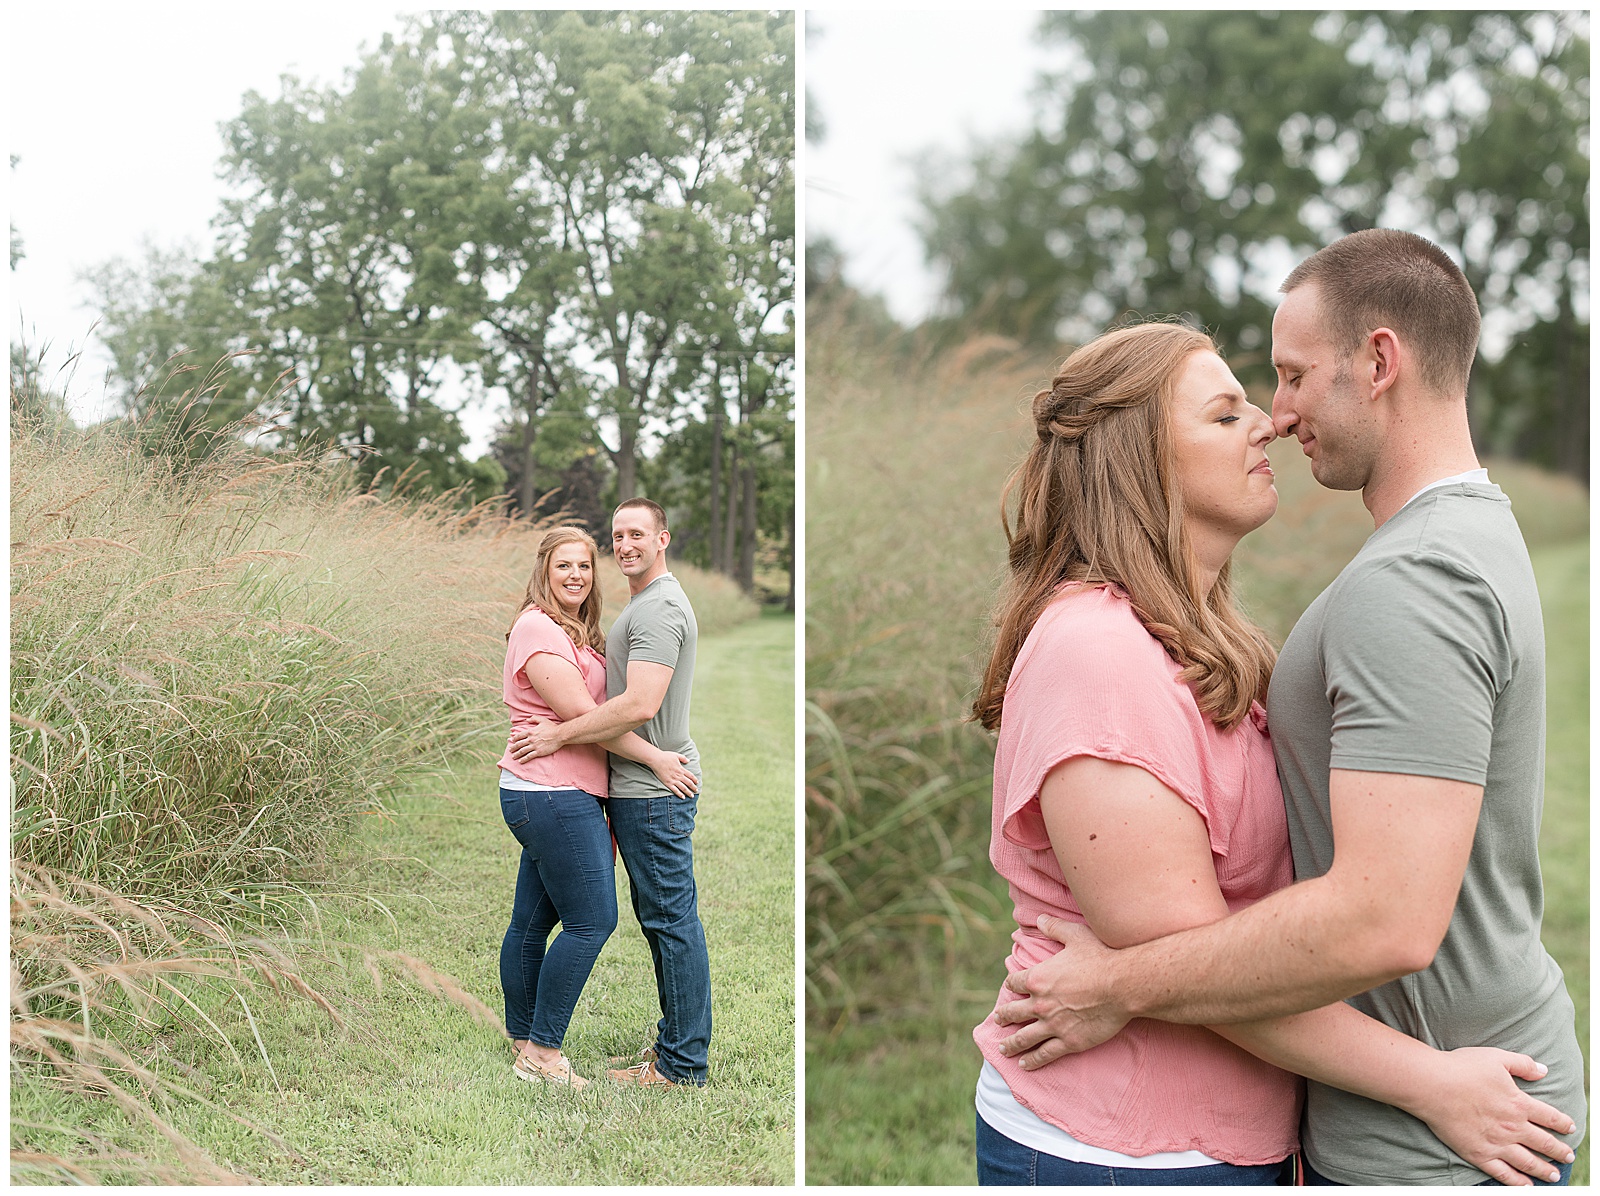 engaged couple hugging tightly in grass pathway in between tall wild grasses on cloudy evening in the summertime